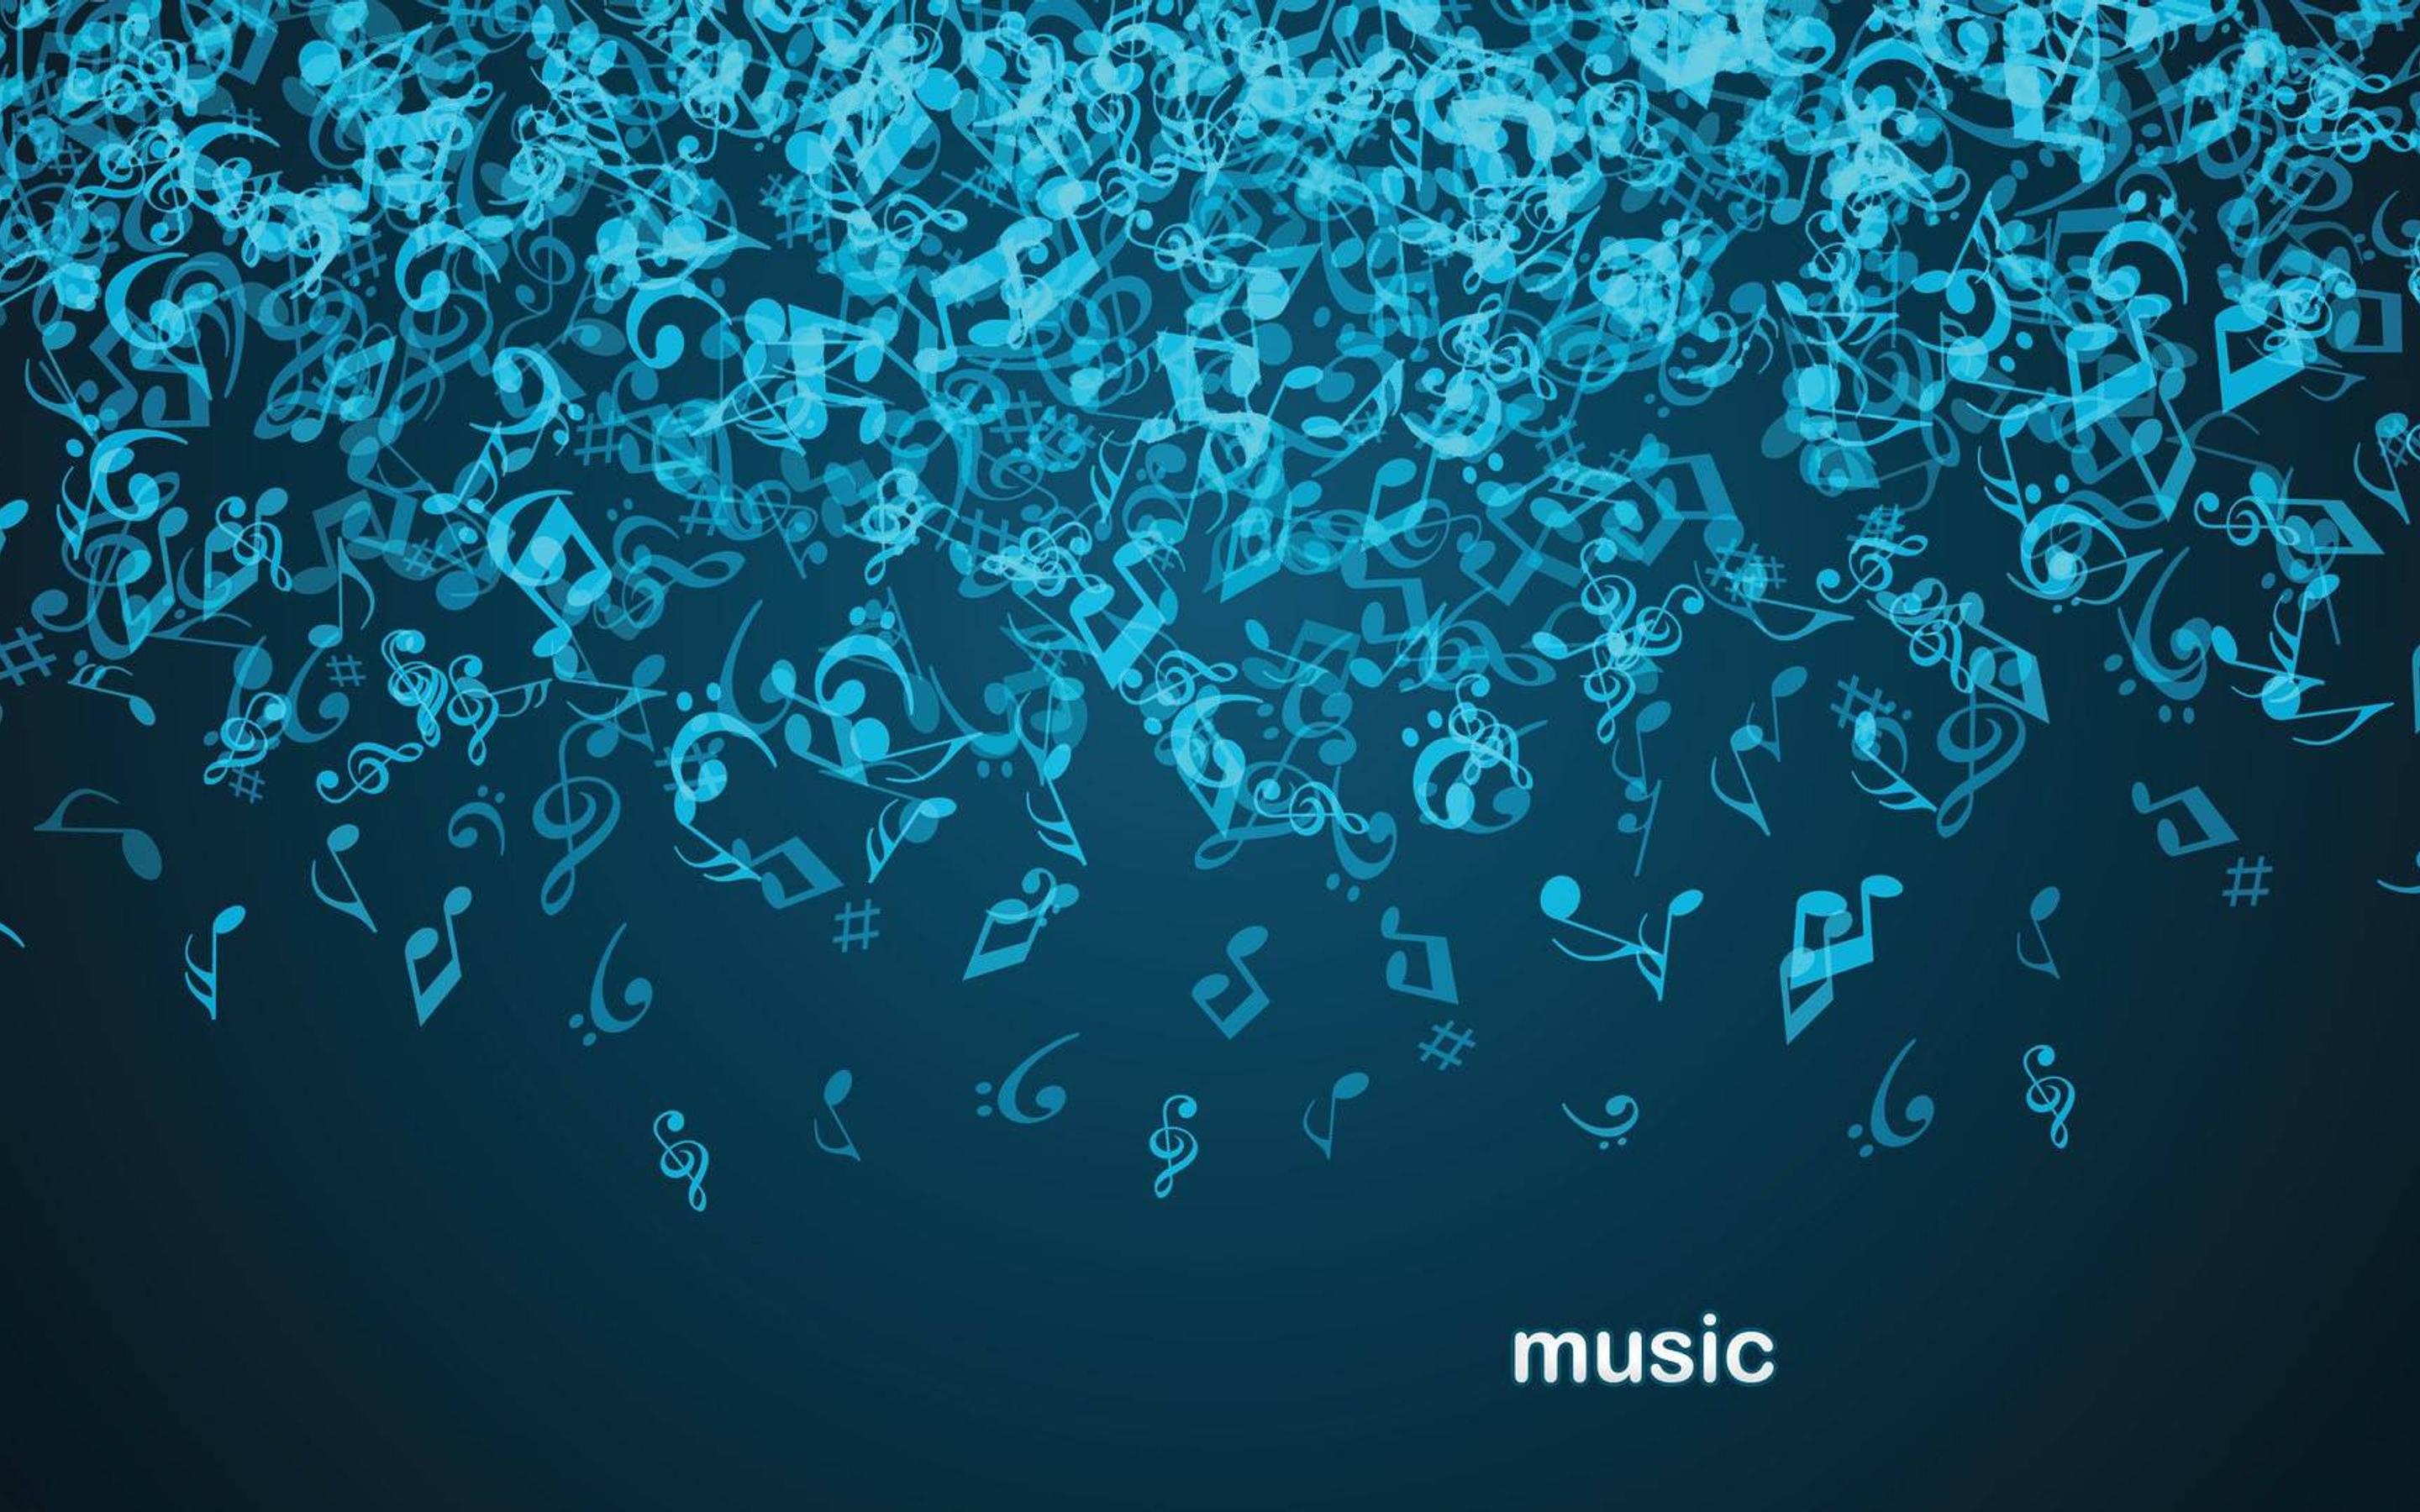 Blue notes and sol keys flies in the air - Music wallpaper